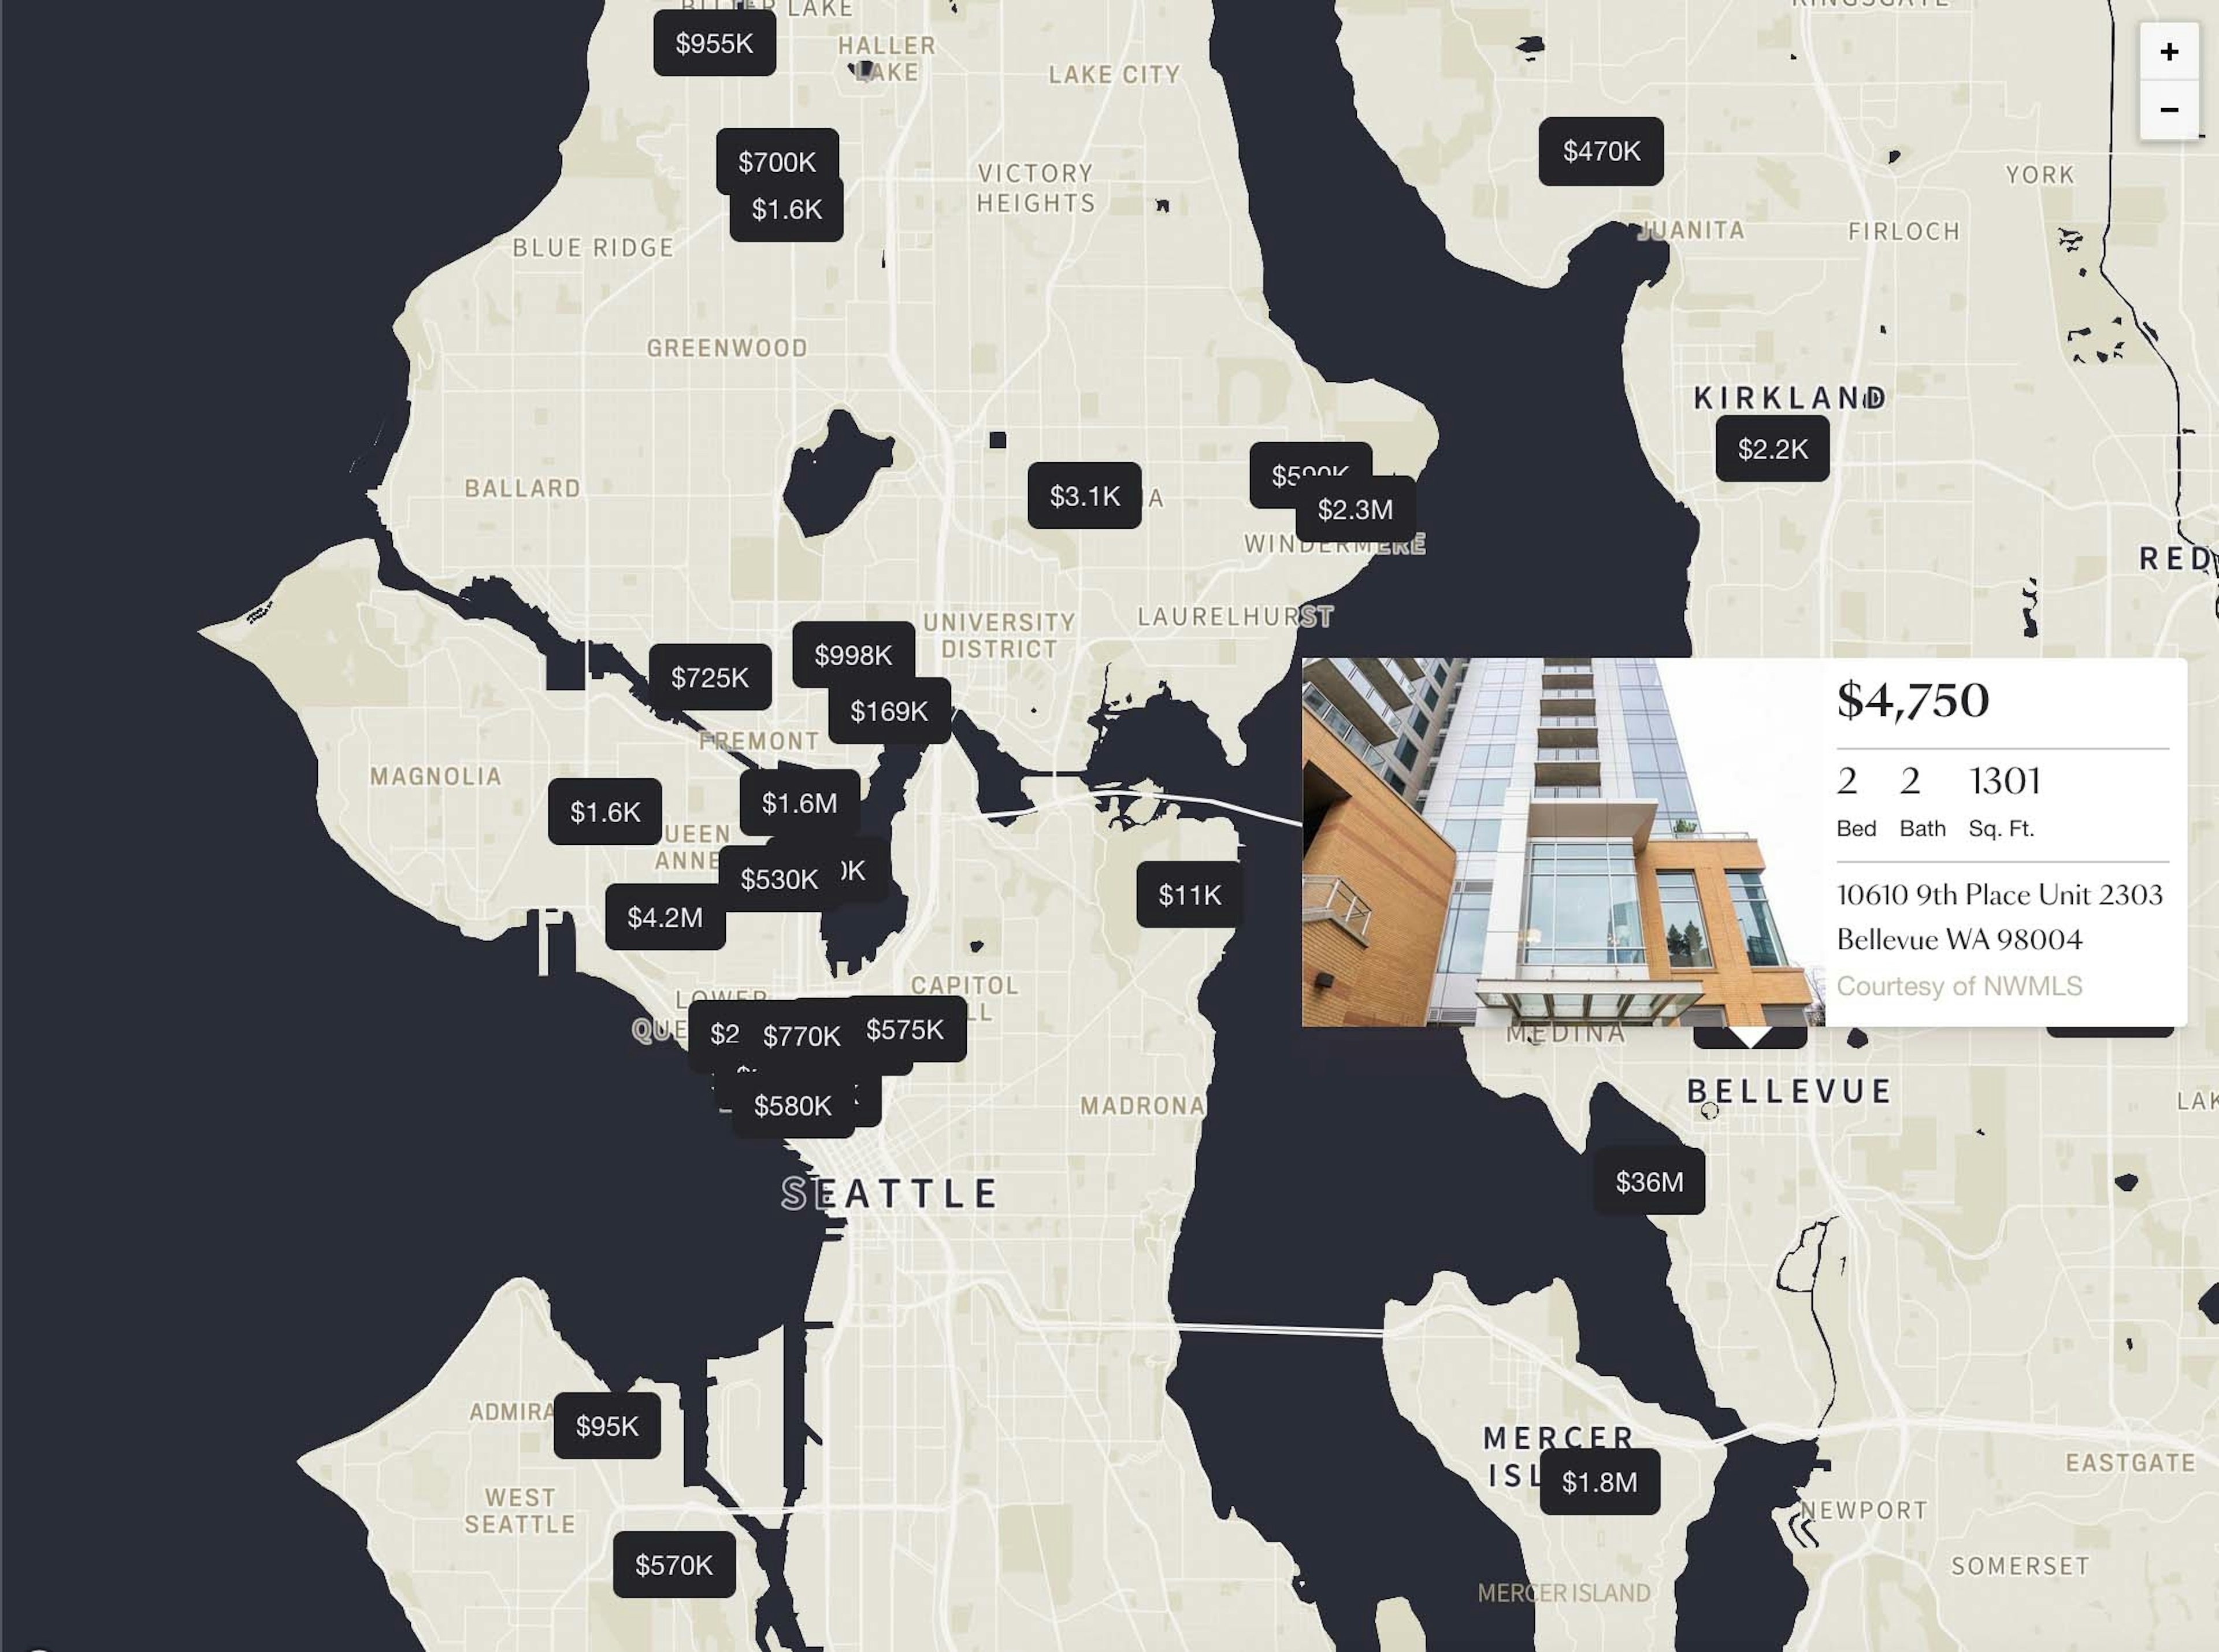 Map of Seattle displaying properties for sale